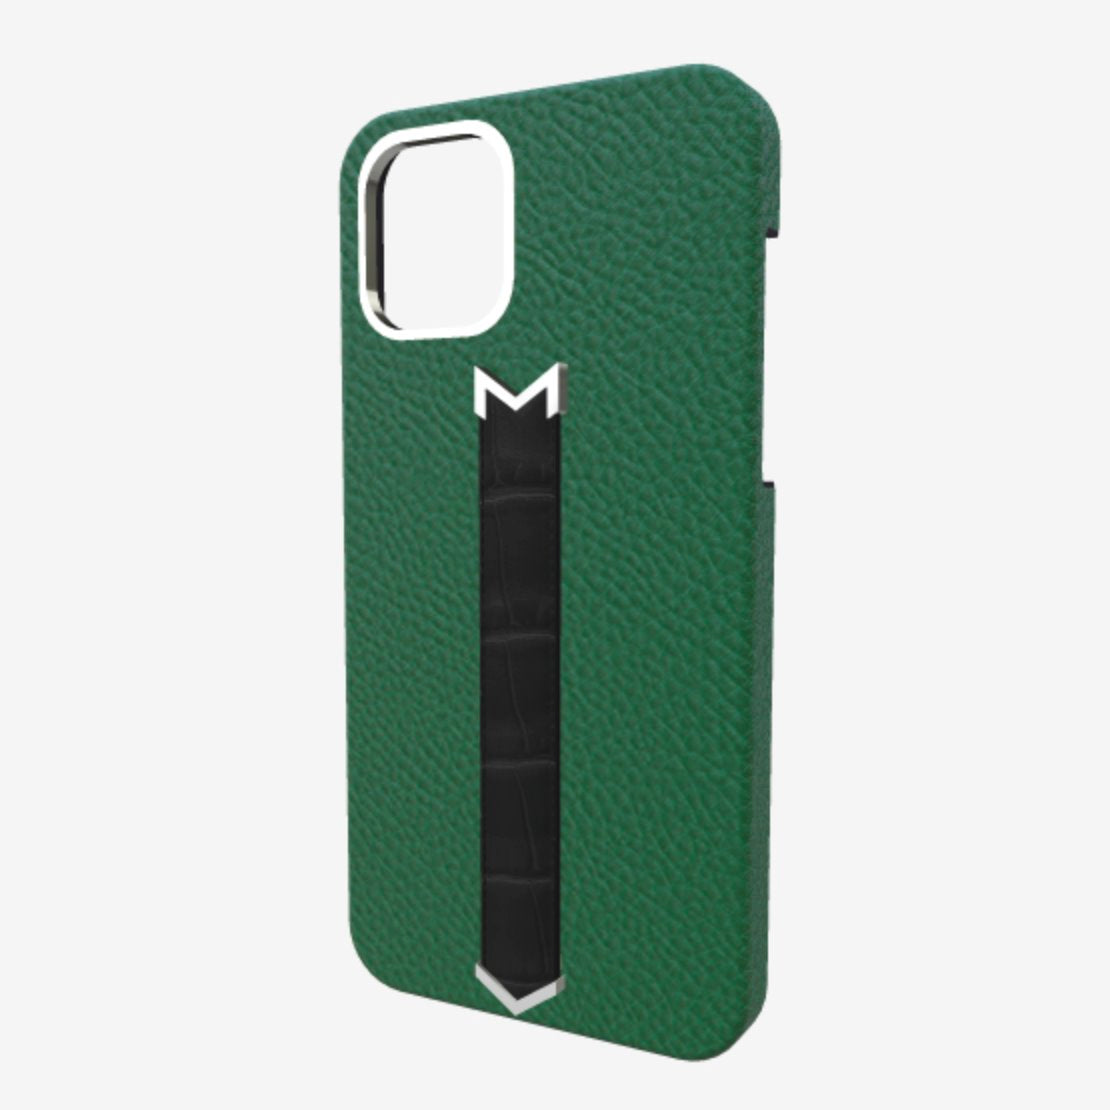 Silver Finger Strap Case for iPhone 13 Pro in Genuine Calfskin and Alligator 